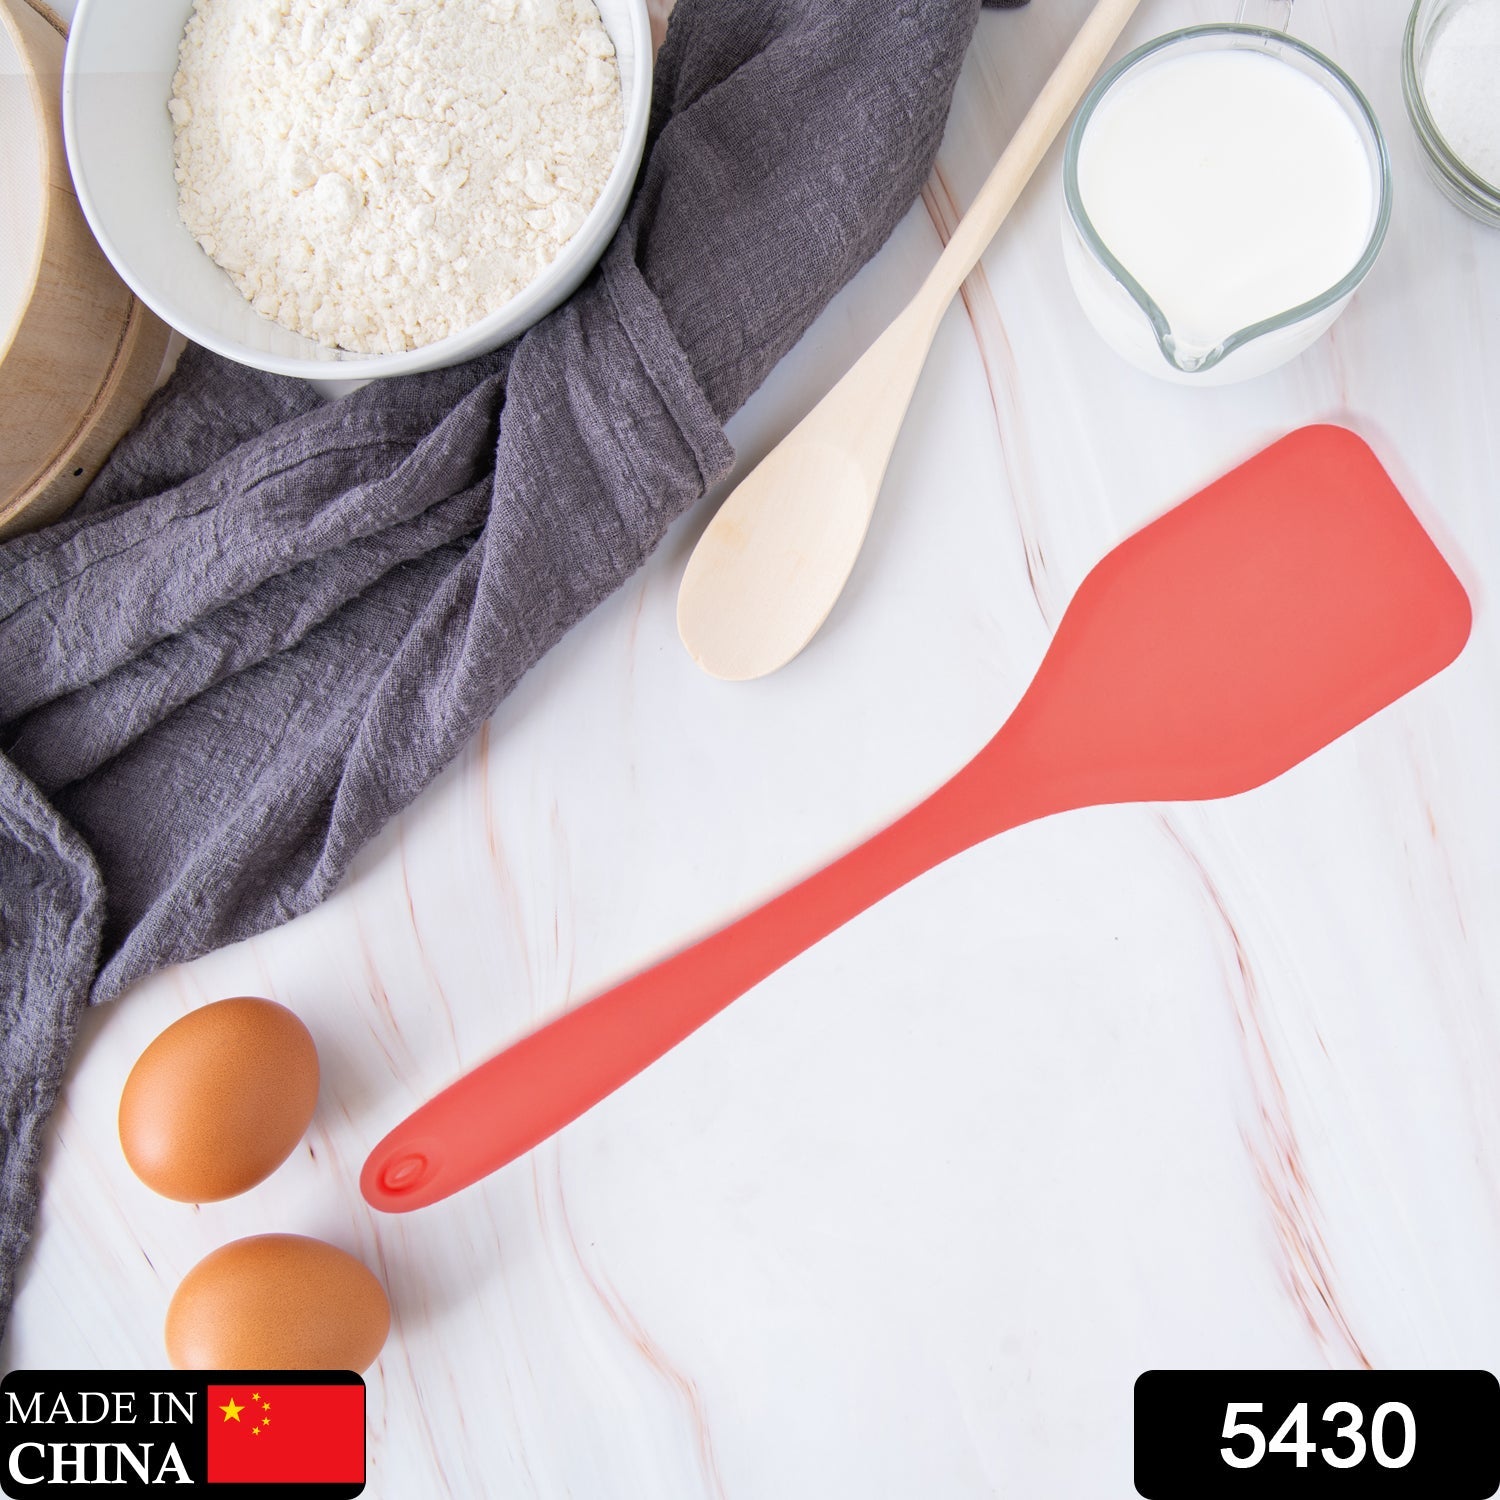 5430 Silicone Spoonula / Spatula Spoon, High Heat Resistant to 480°F, Hygienic One Piece Design, Large Non Stick Cooking Utensil (30cm)